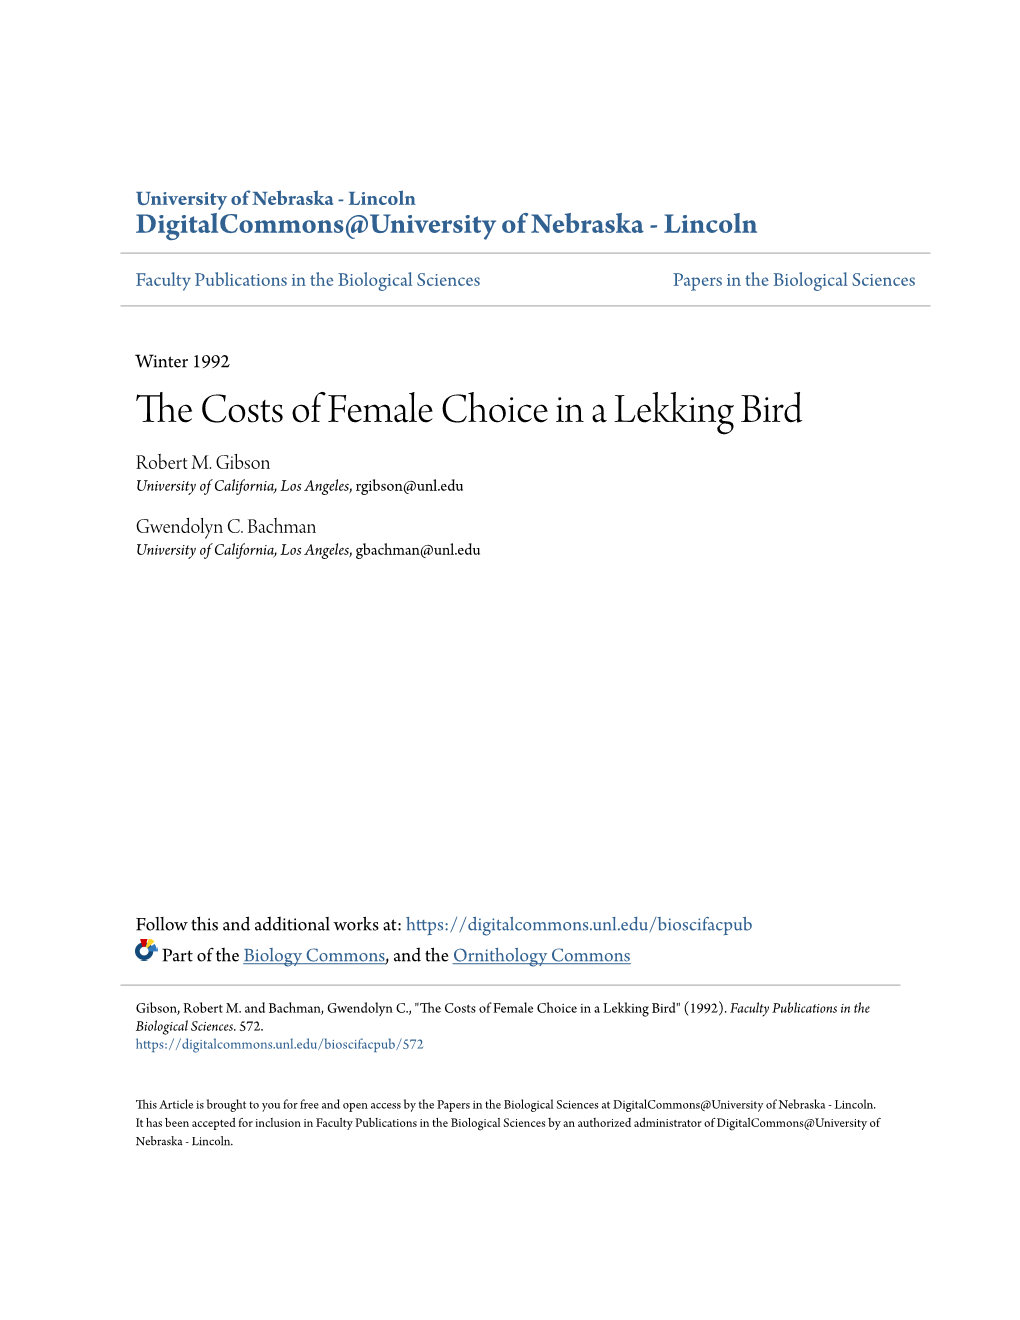 The Costs of Female Choice in a Lekking Bird